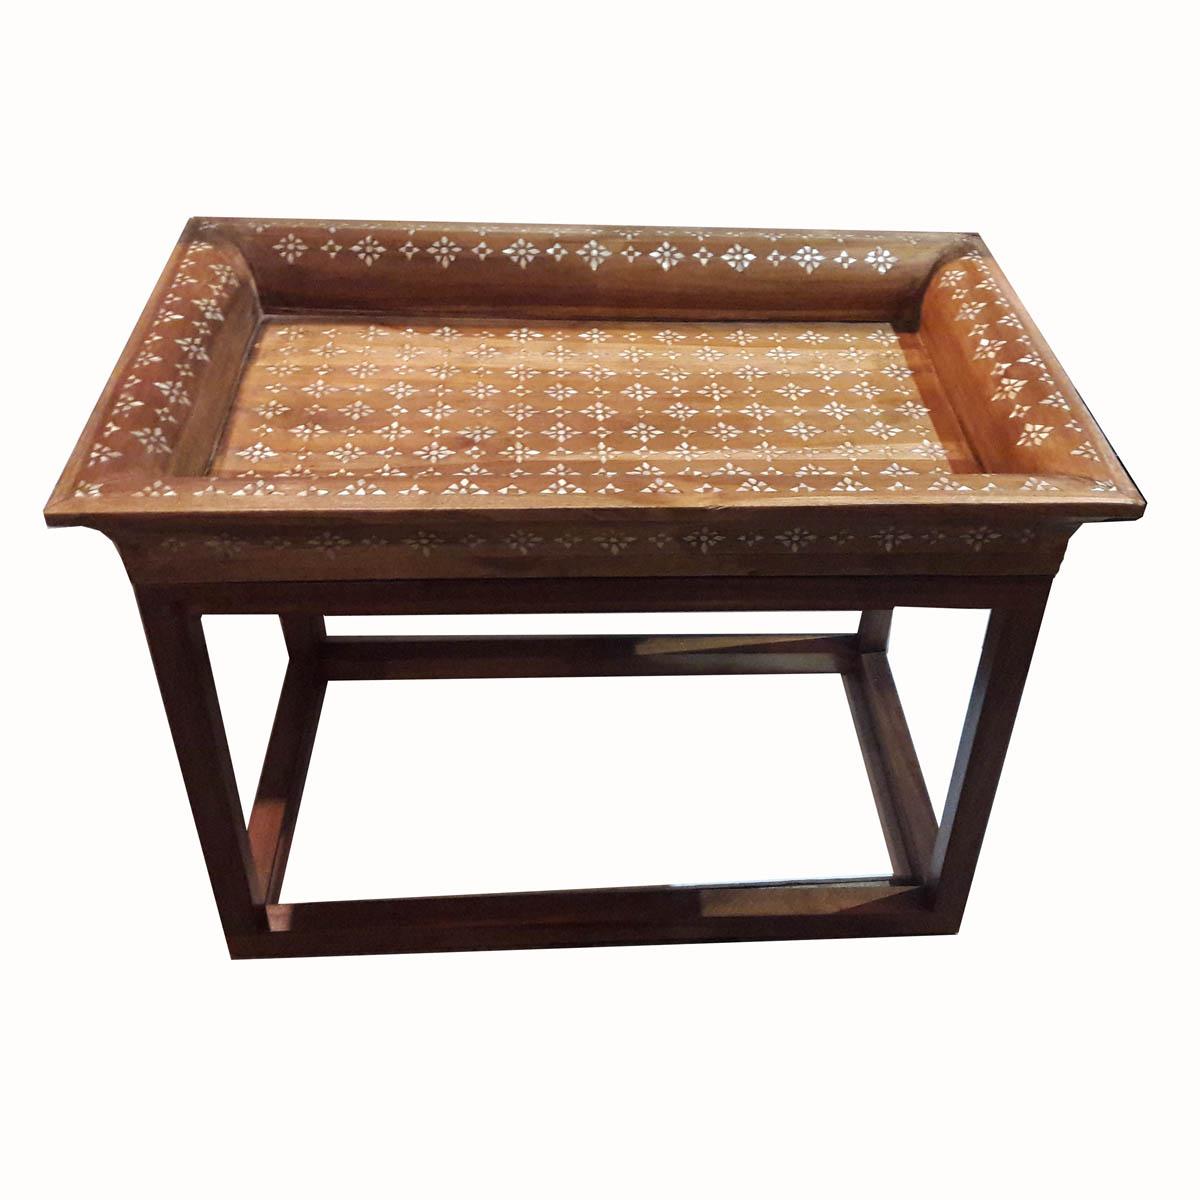 A contemporary coffee table, with a vintage tray inlaid in mother-of-pearl as the top and a wooden stretcher base. This original intervention turned a beautiful vintage tray into a singular, practical side or end table.
   